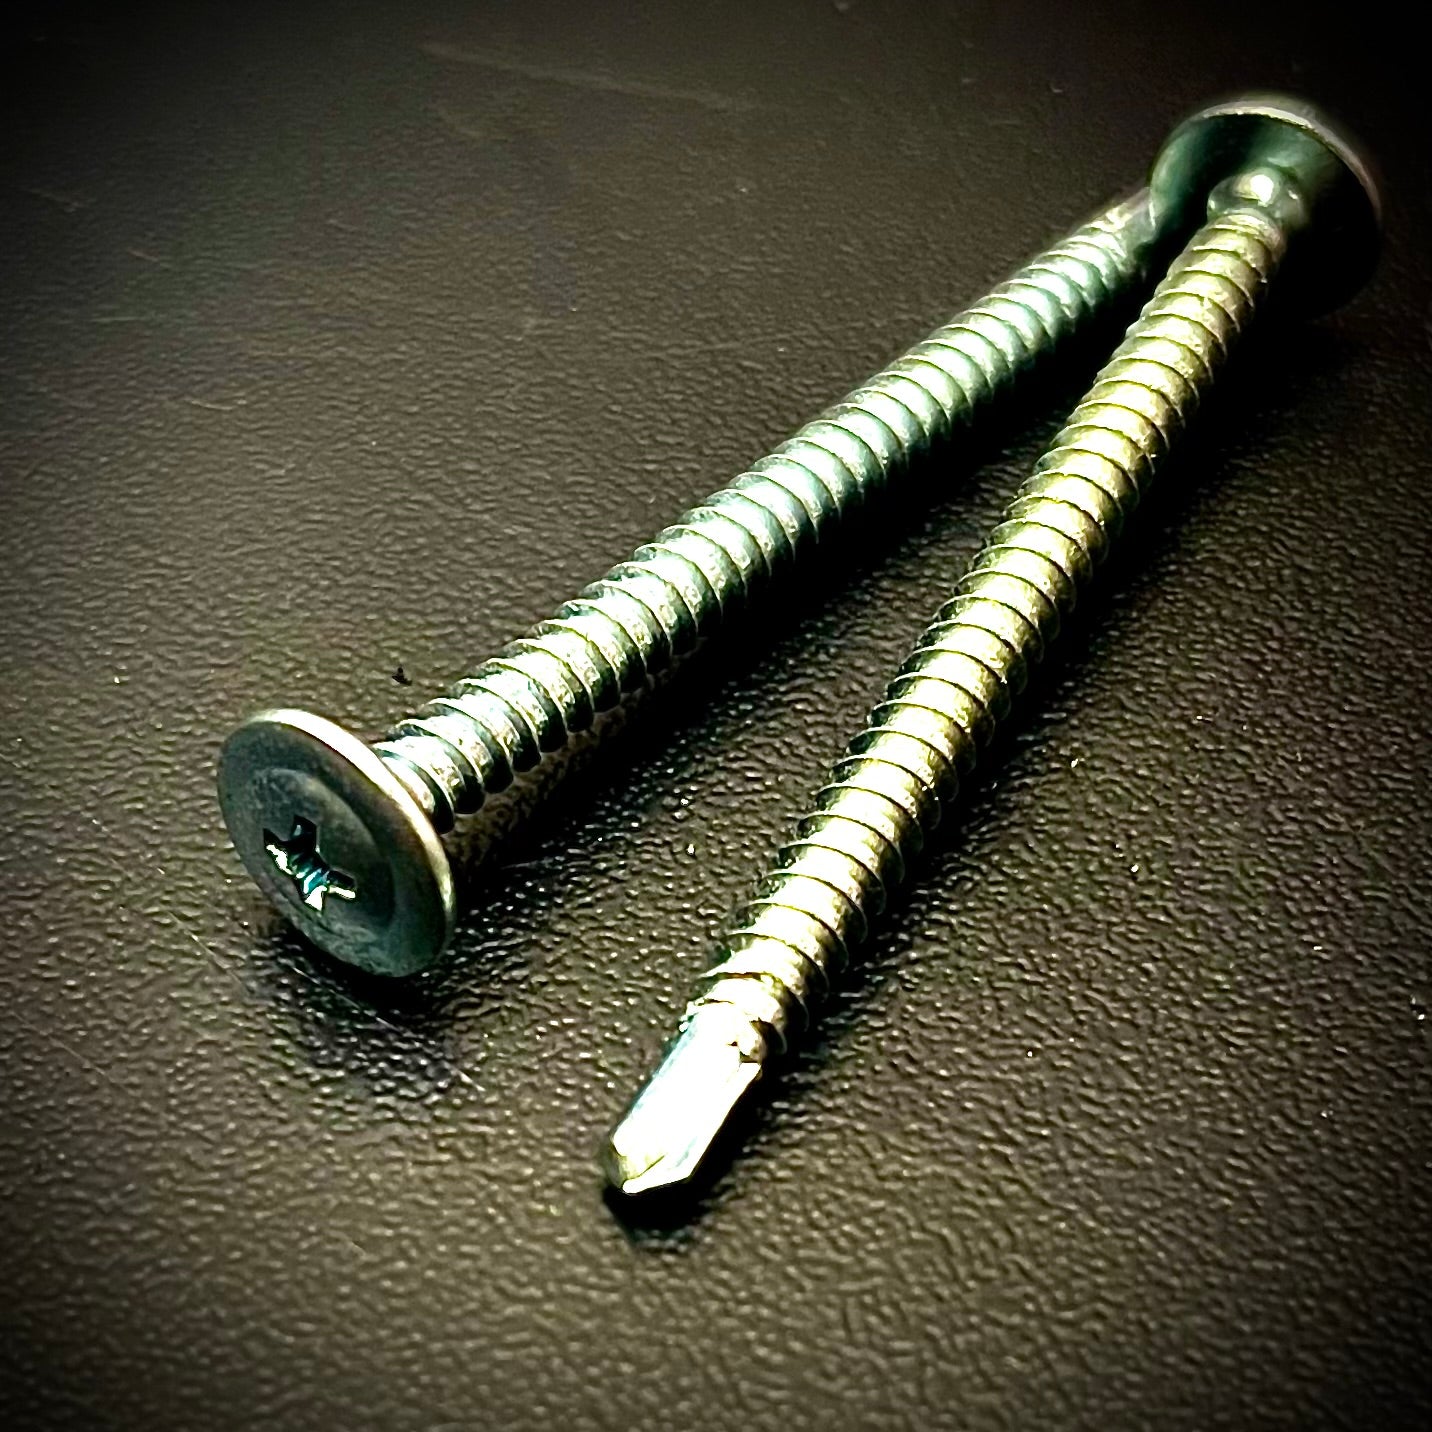 BayPole Self-Drilling Tapping Screws Wafer UPVC Bay Window Fixing - Fixaball Ltd. Fixings and Fasteners UK